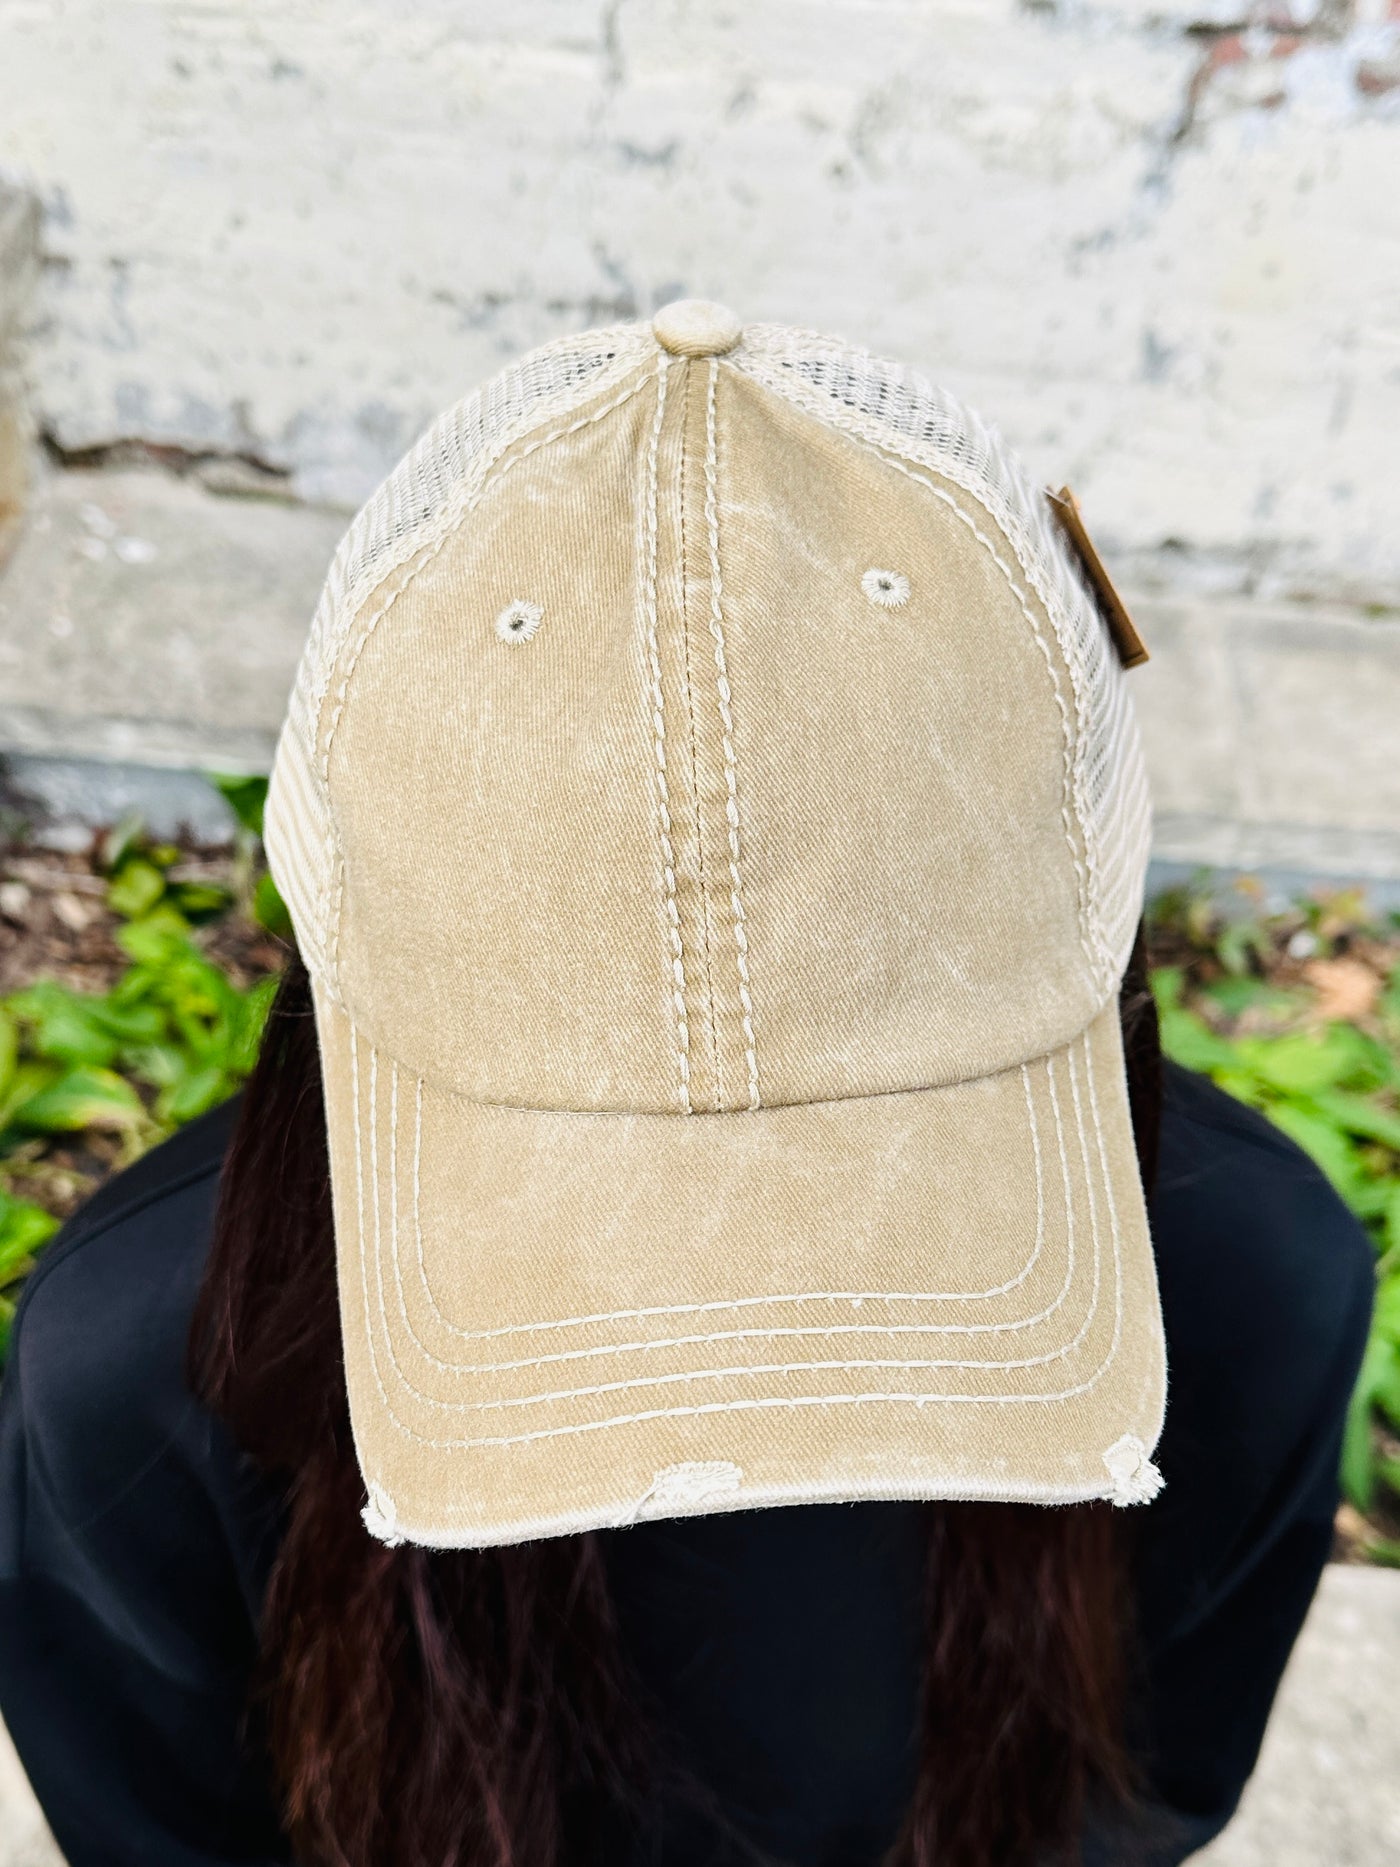 Tan Pony Tail Hat-DMC-Shop Anchored Bliss Women's Boutique Clothing Store